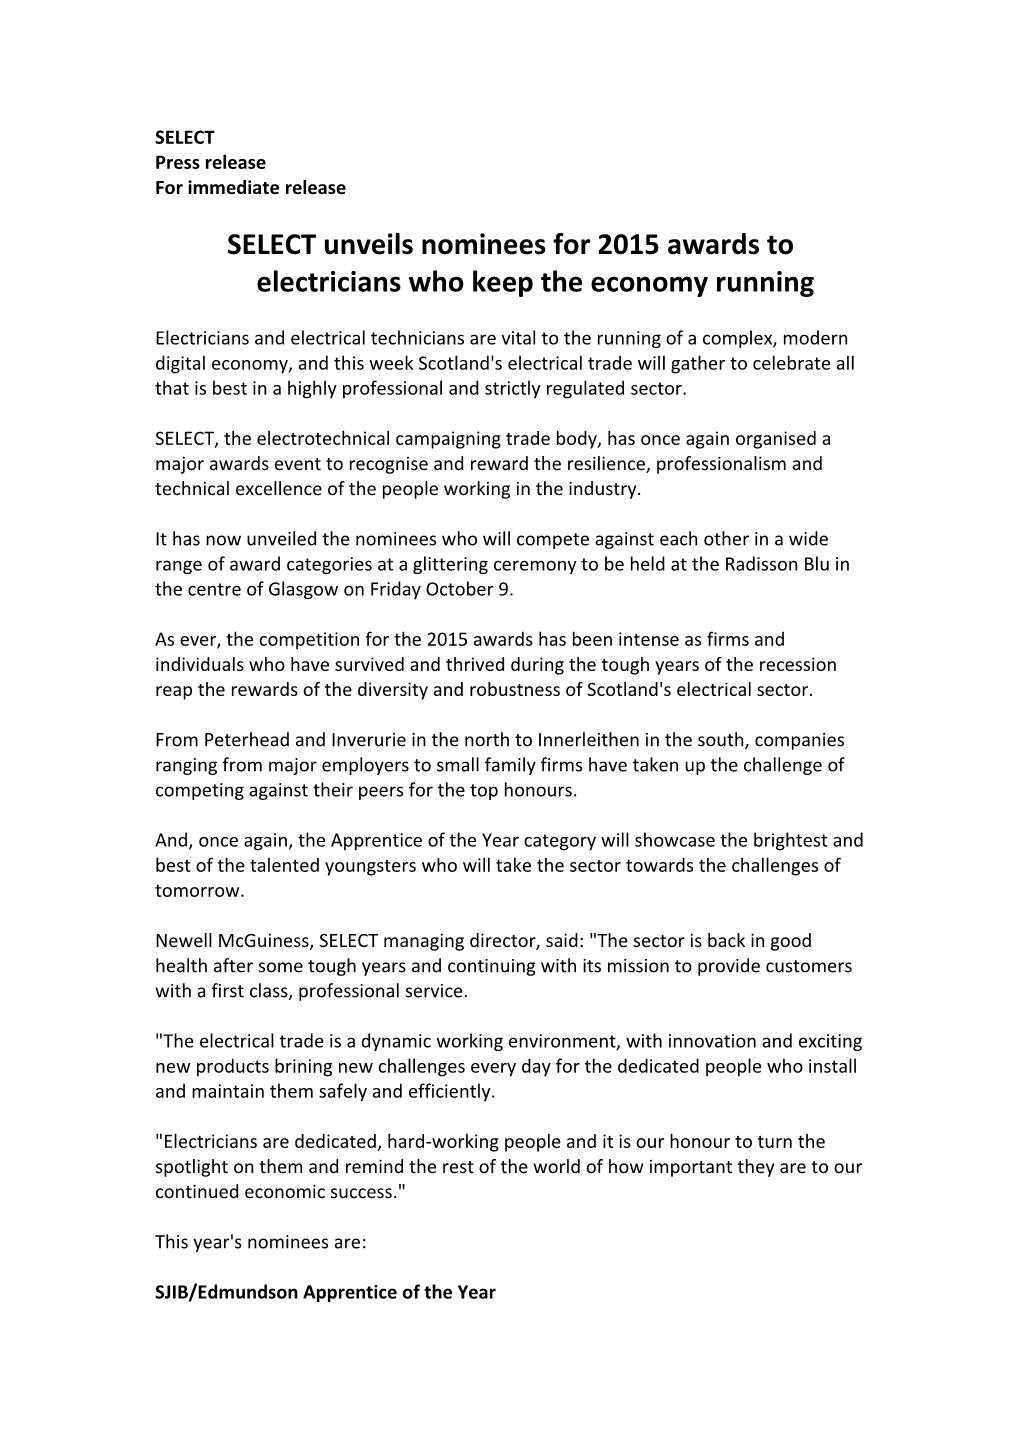 SELECT Unveils Nominees for 2015 Awards to Electricians Who Keep the Economy Running